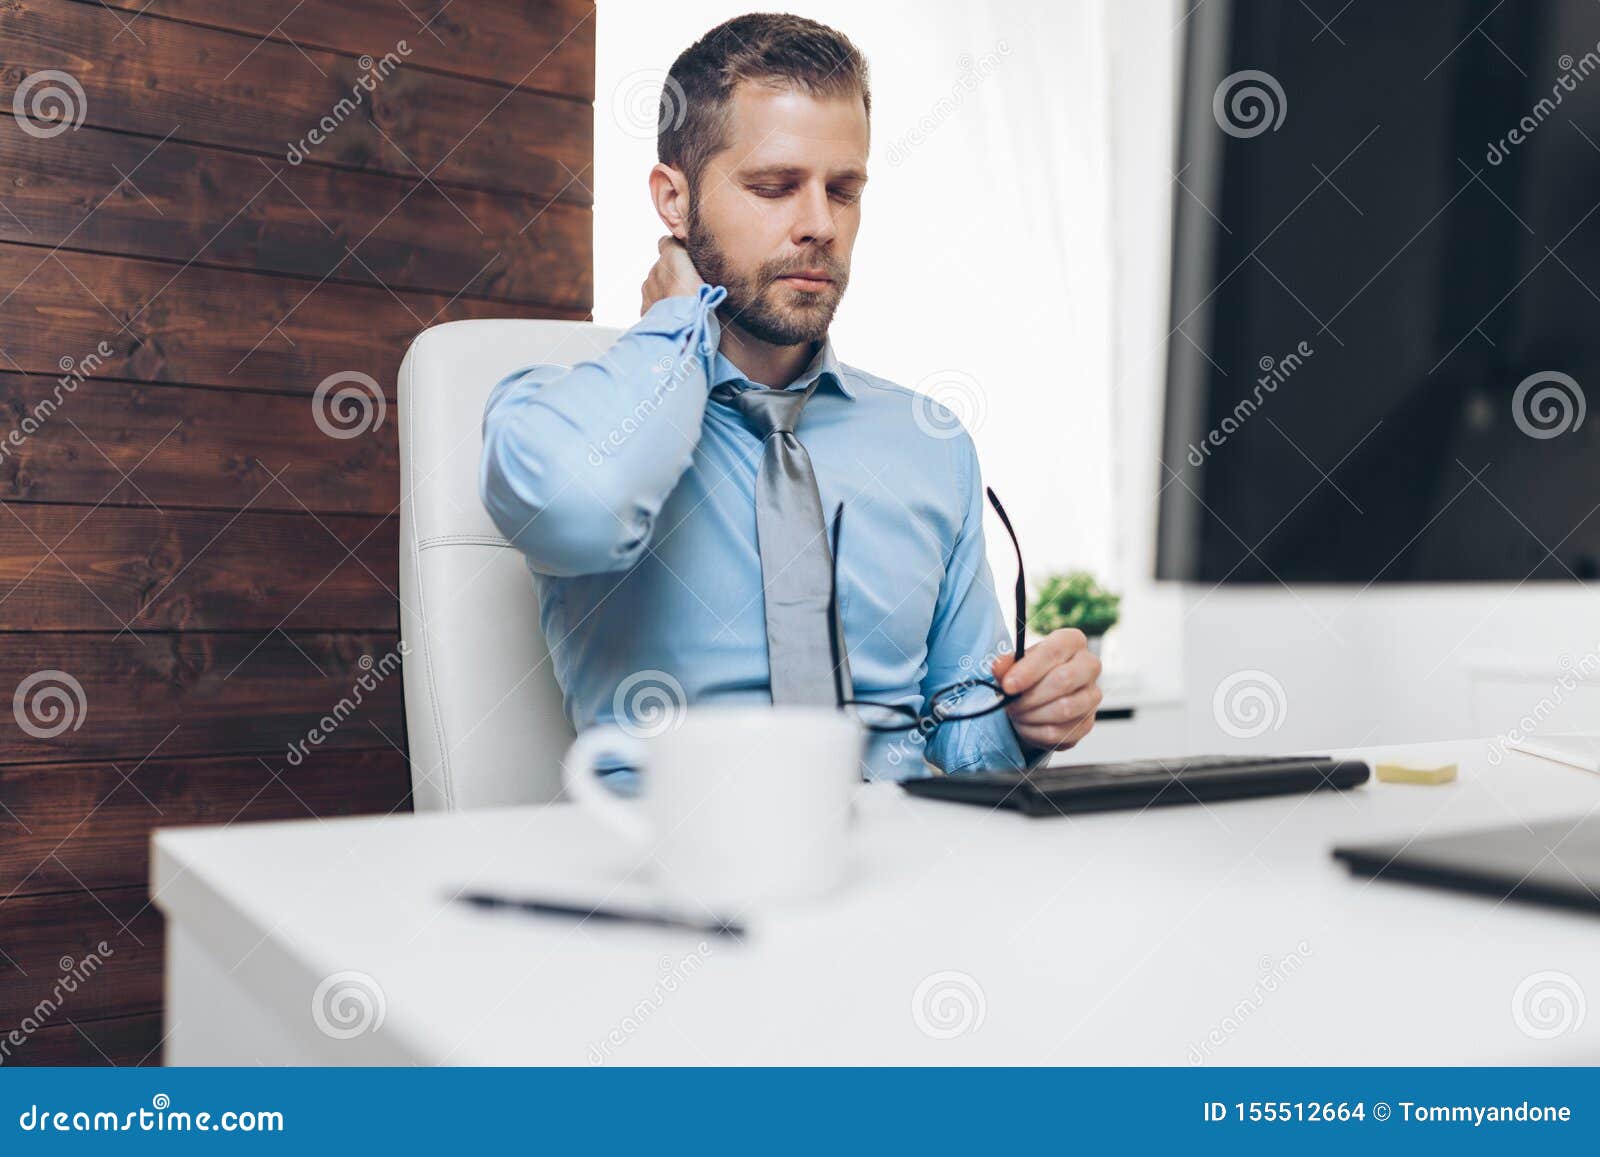 Office Worker With Pain From Sitting At Desk All Day Stock Photo